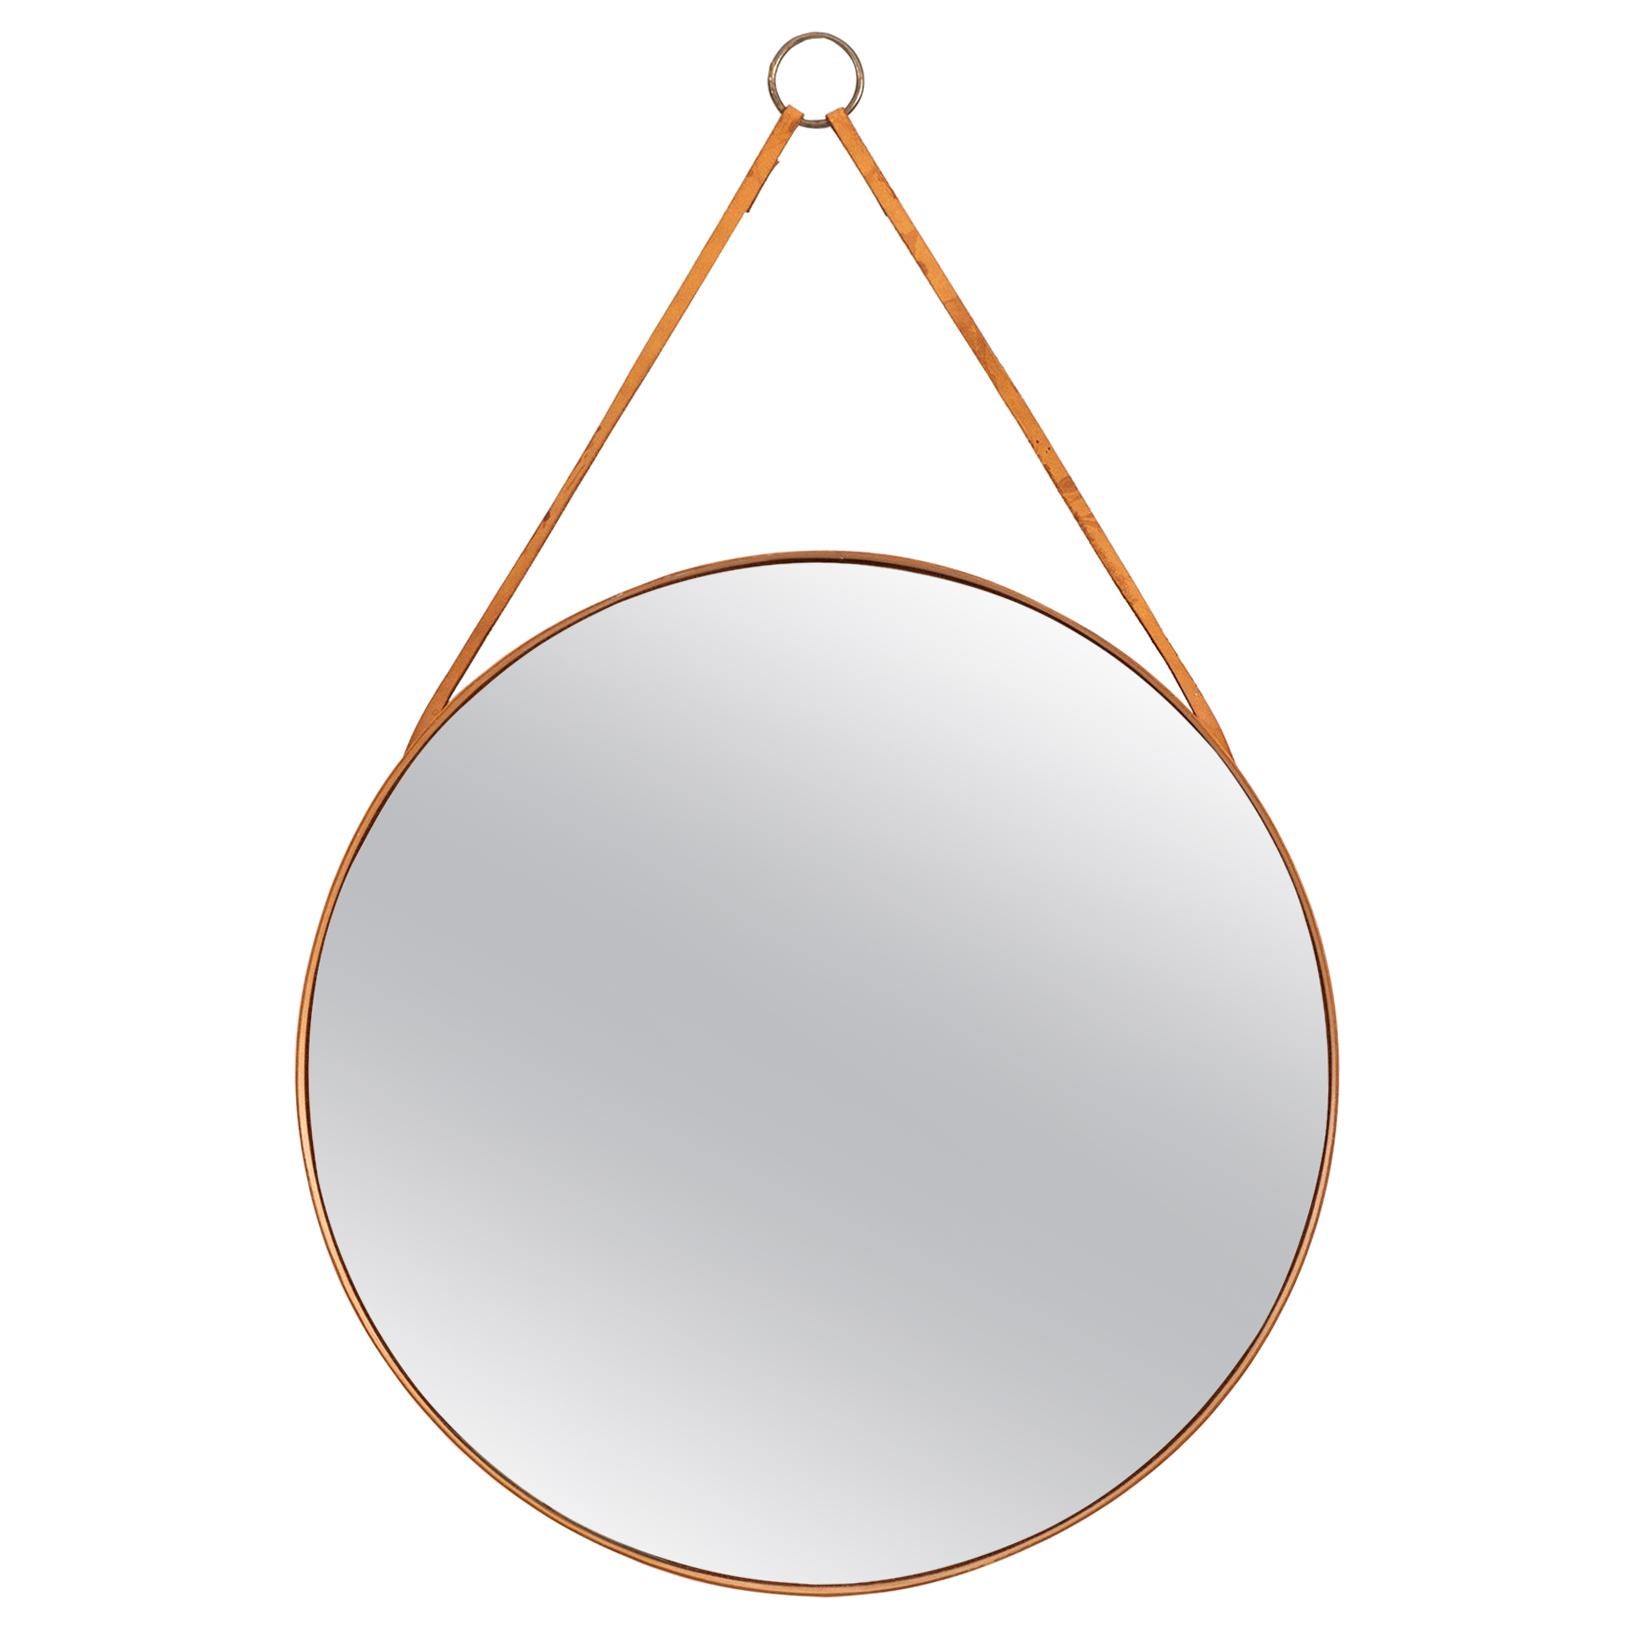 Round Mirror in Teak and Leather Produced by Glasmäster in Markaryd, Sweden